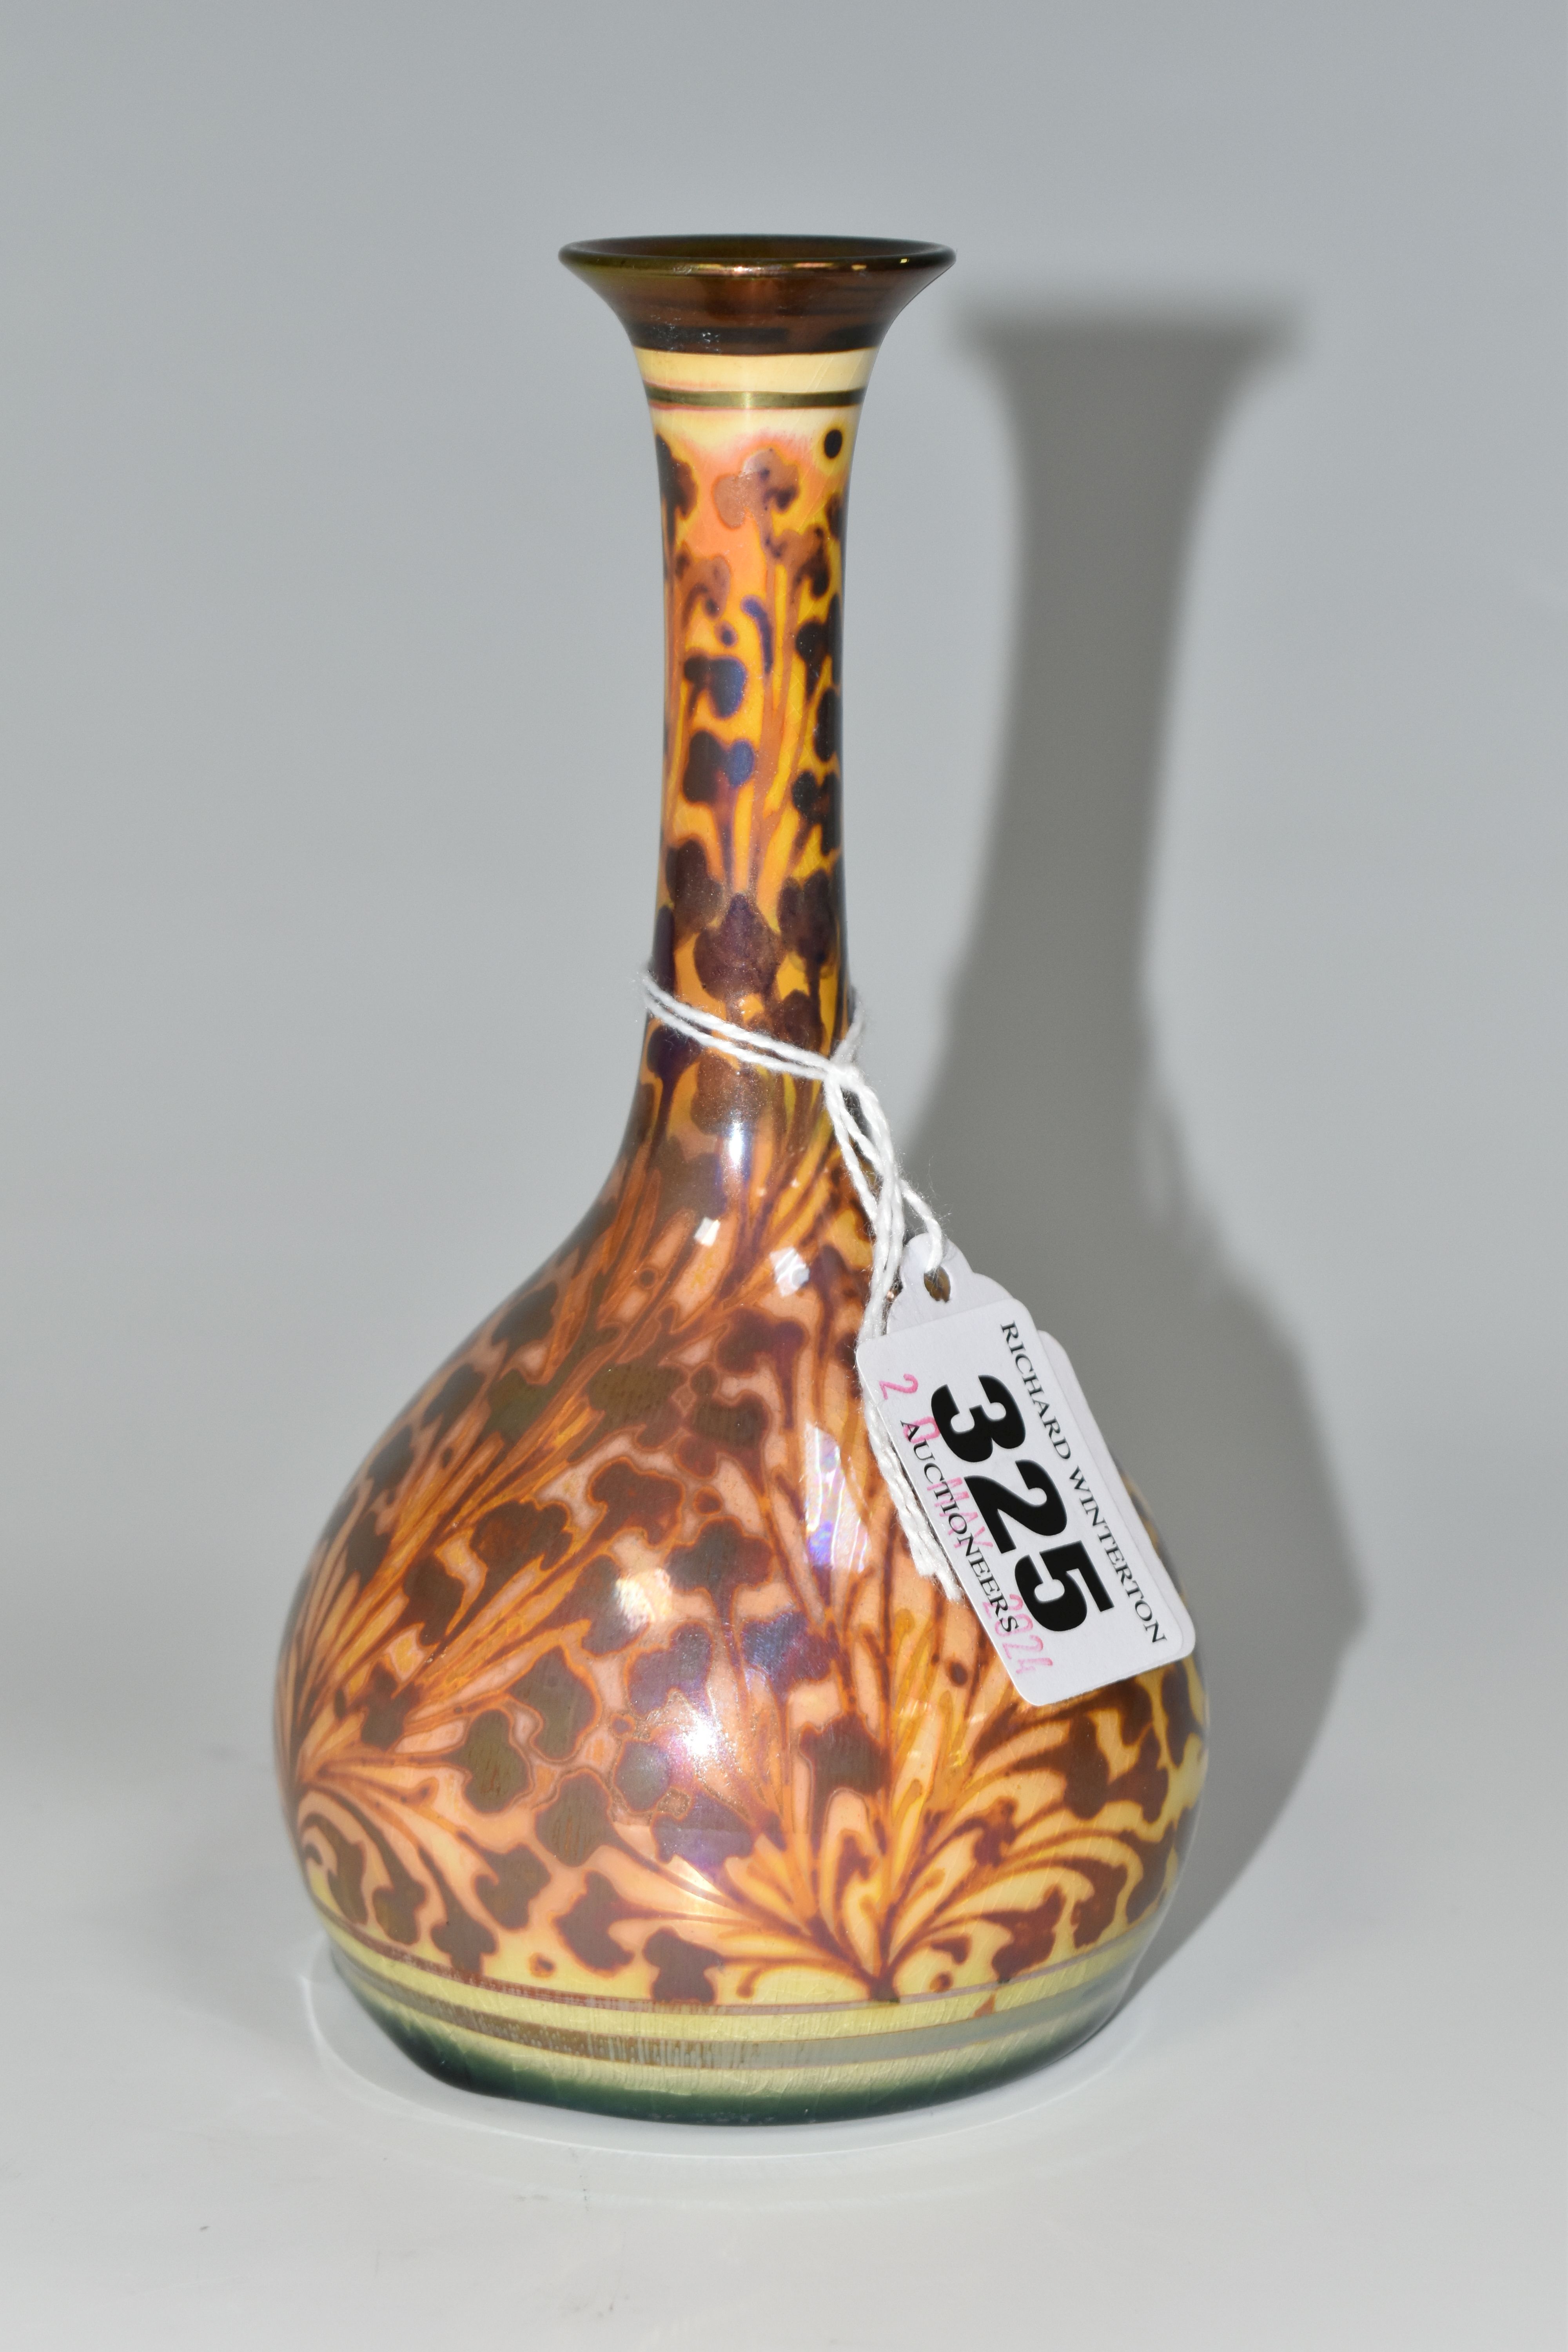 A PILKINGTON'S BUD VASE, with foliate decoration on a yellow ground, model no 2598, impressed P